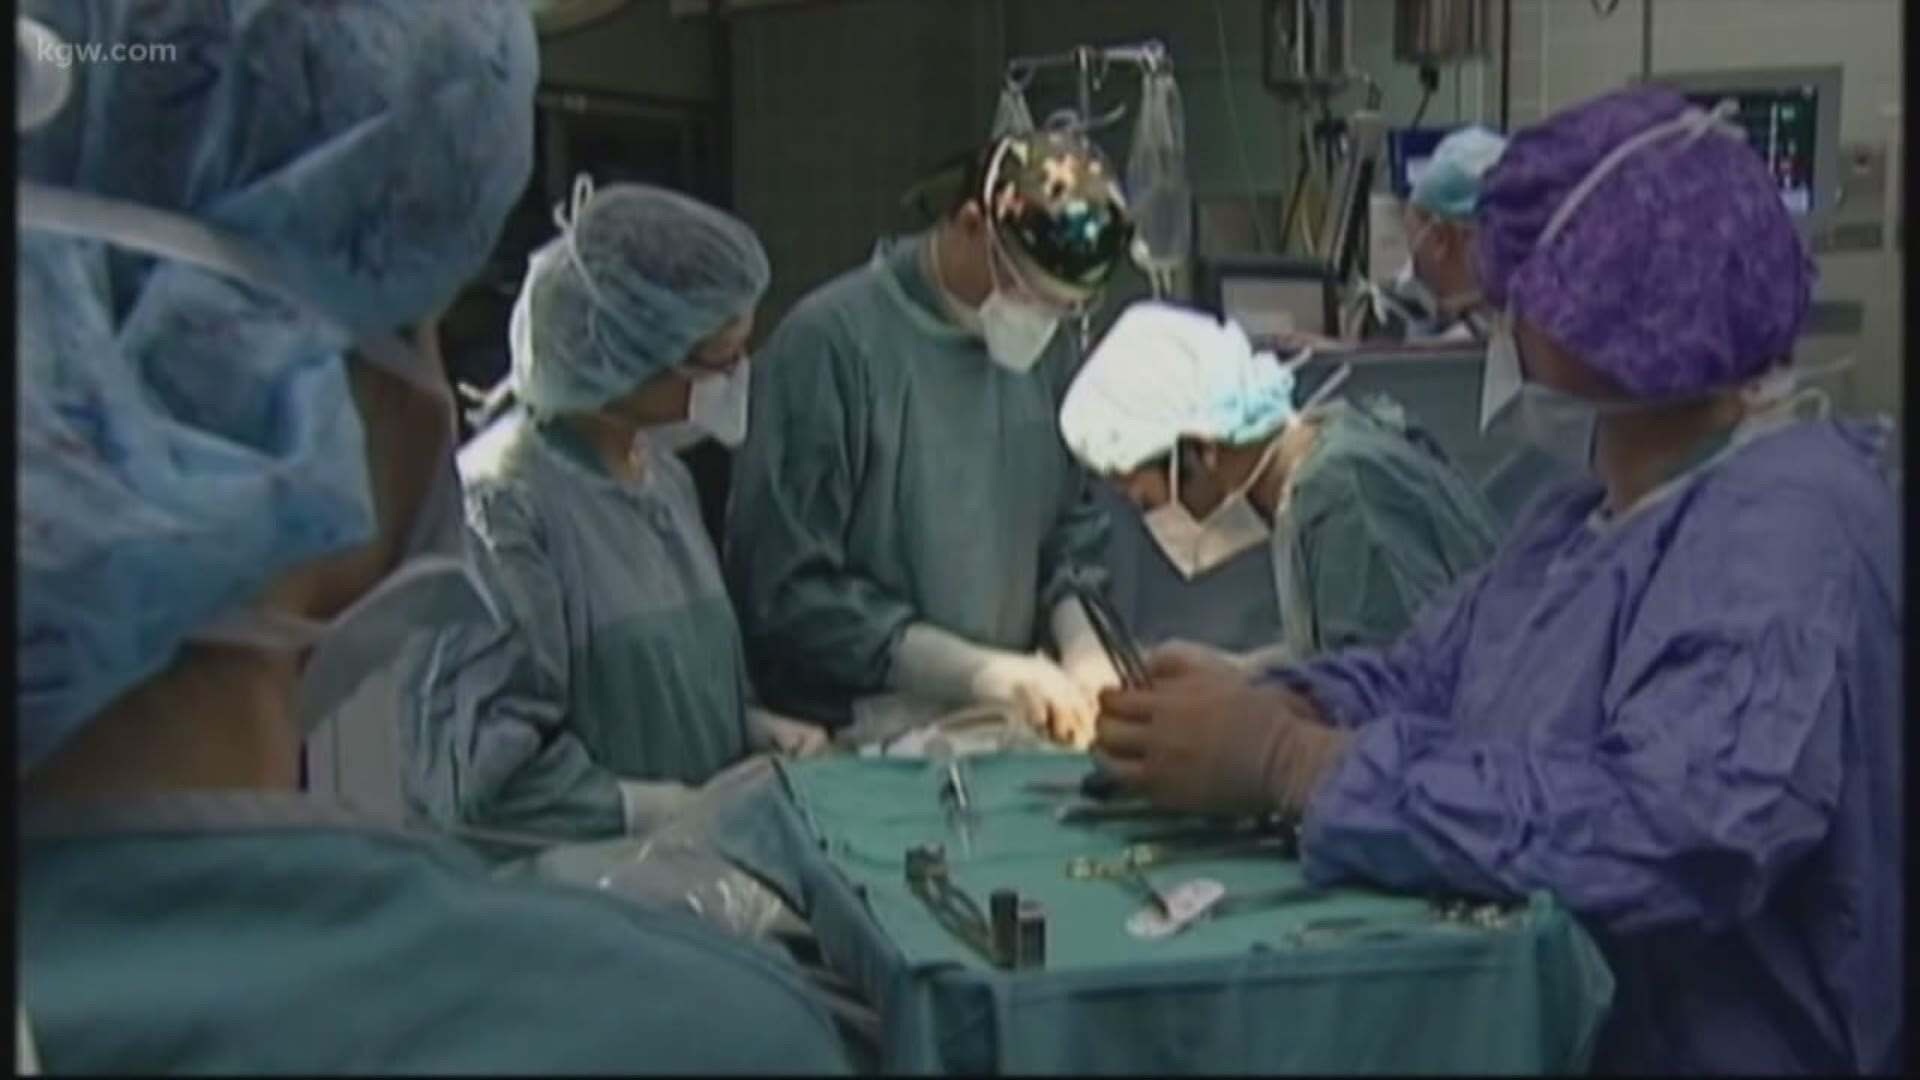 The impact of the OHSU heart transplant program's pause.